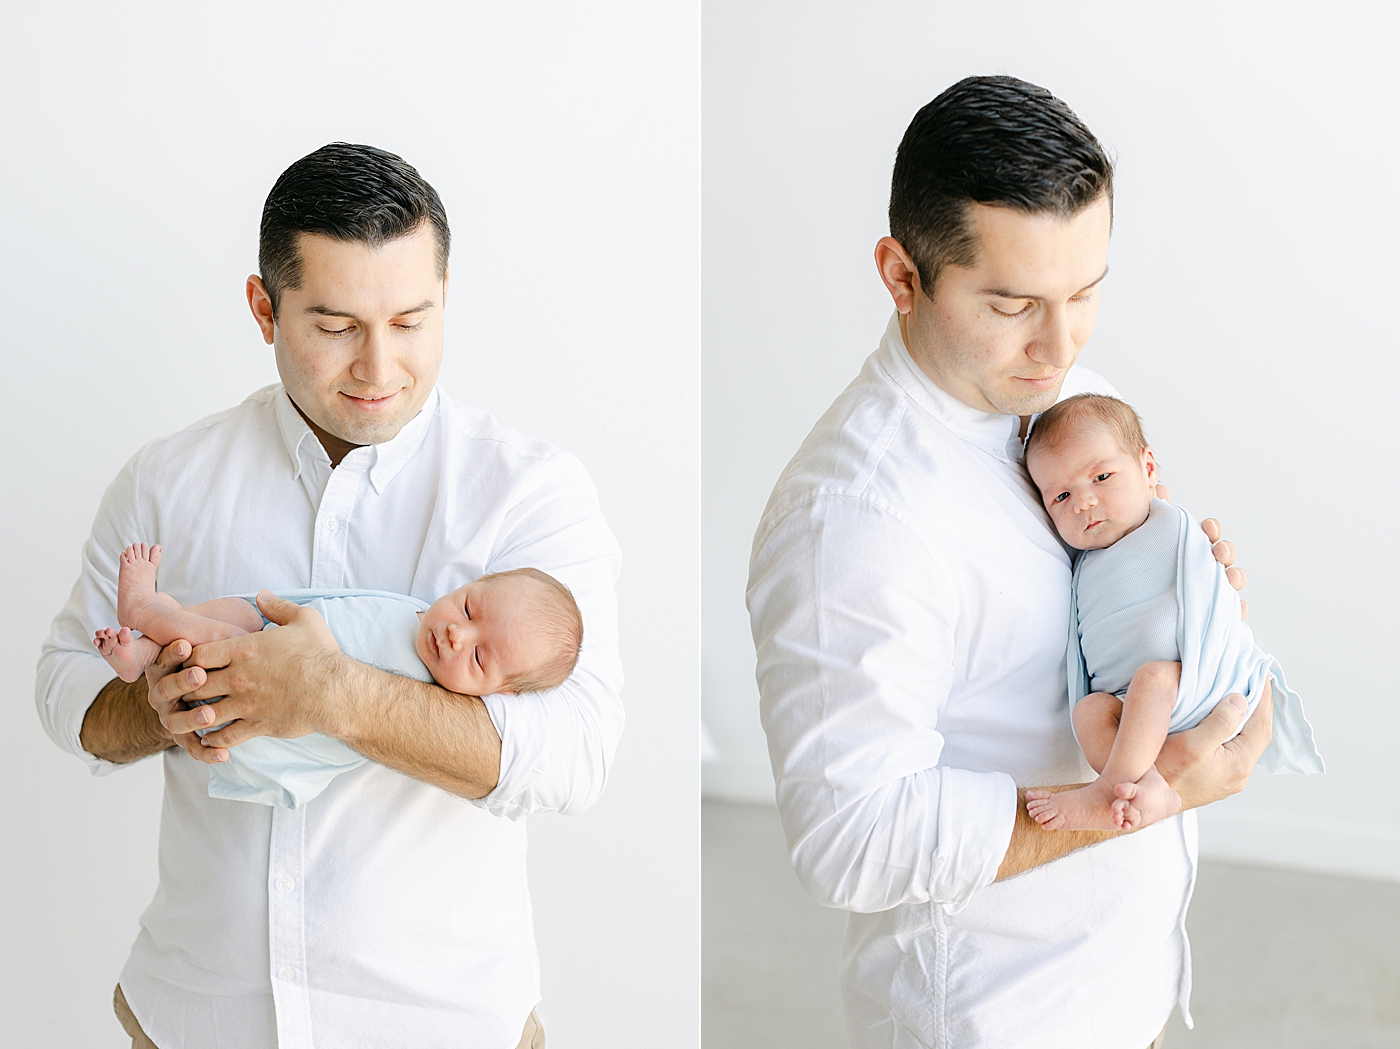 Dad in a white shirt holding his newborn baby boy | Image by Sana Ahmed Photography 